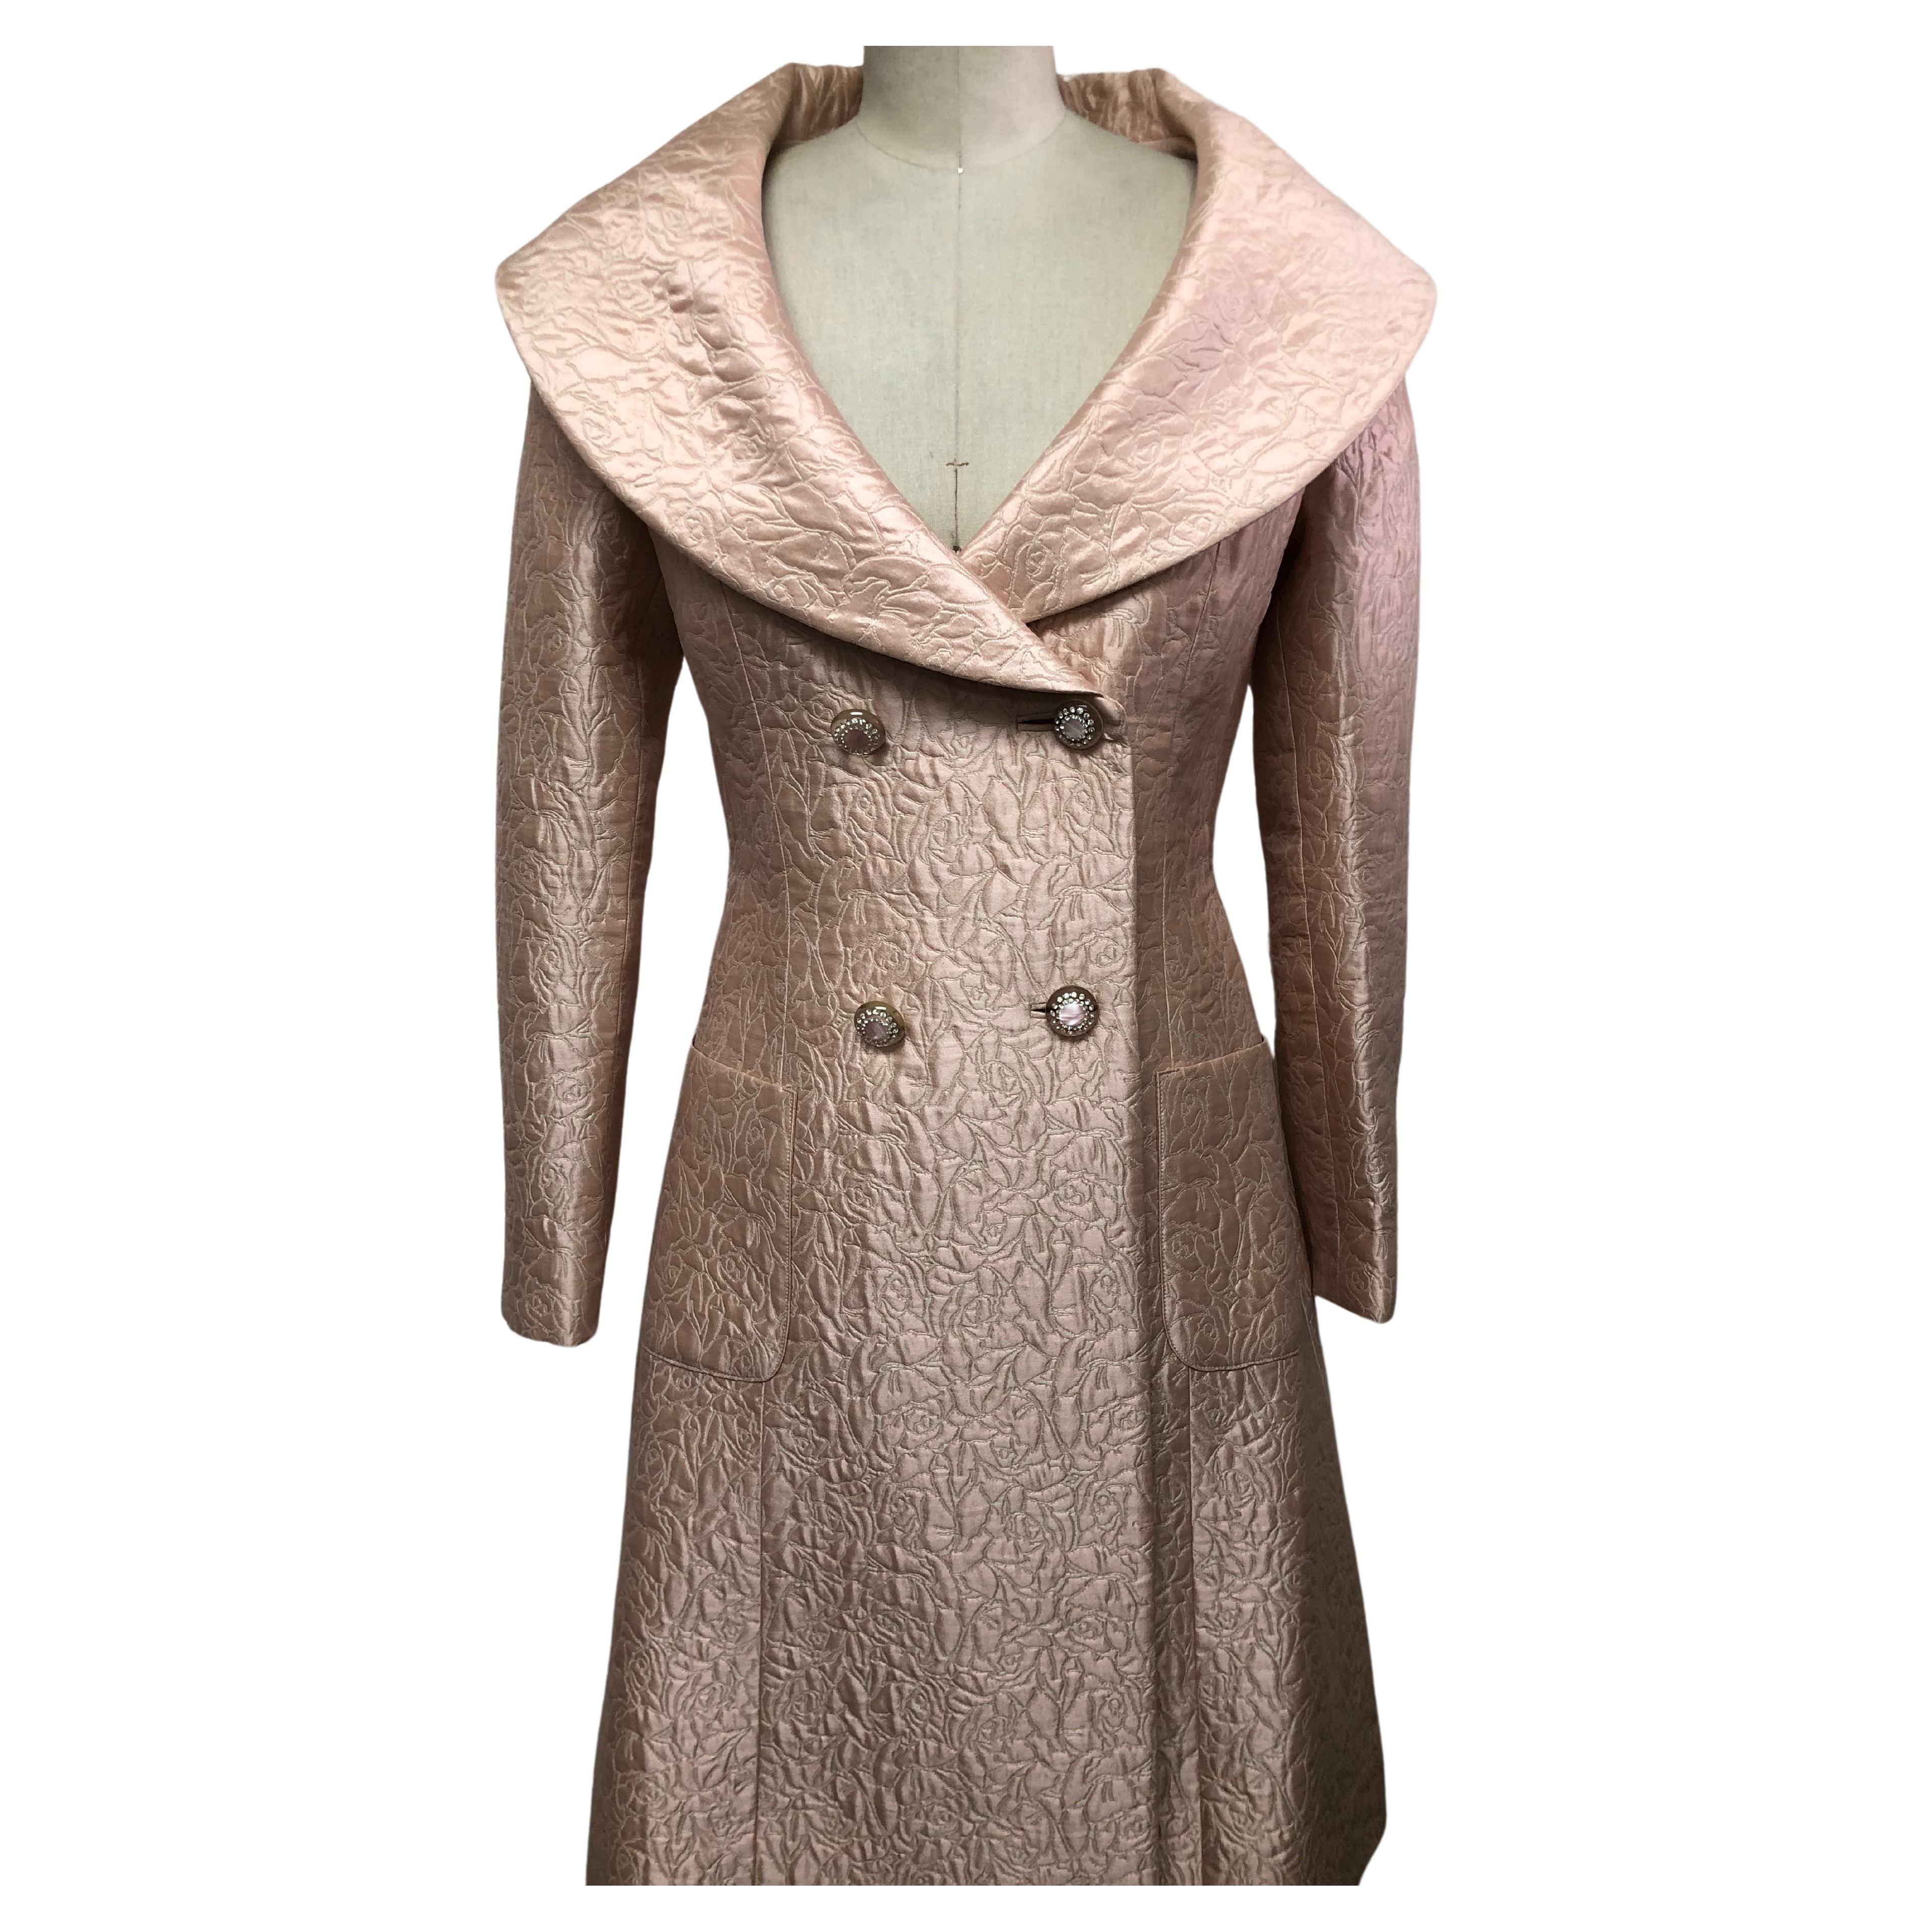 Pale Blush Matelasse Portrait Collar Double Breasted Coat with Diamonte Buttons